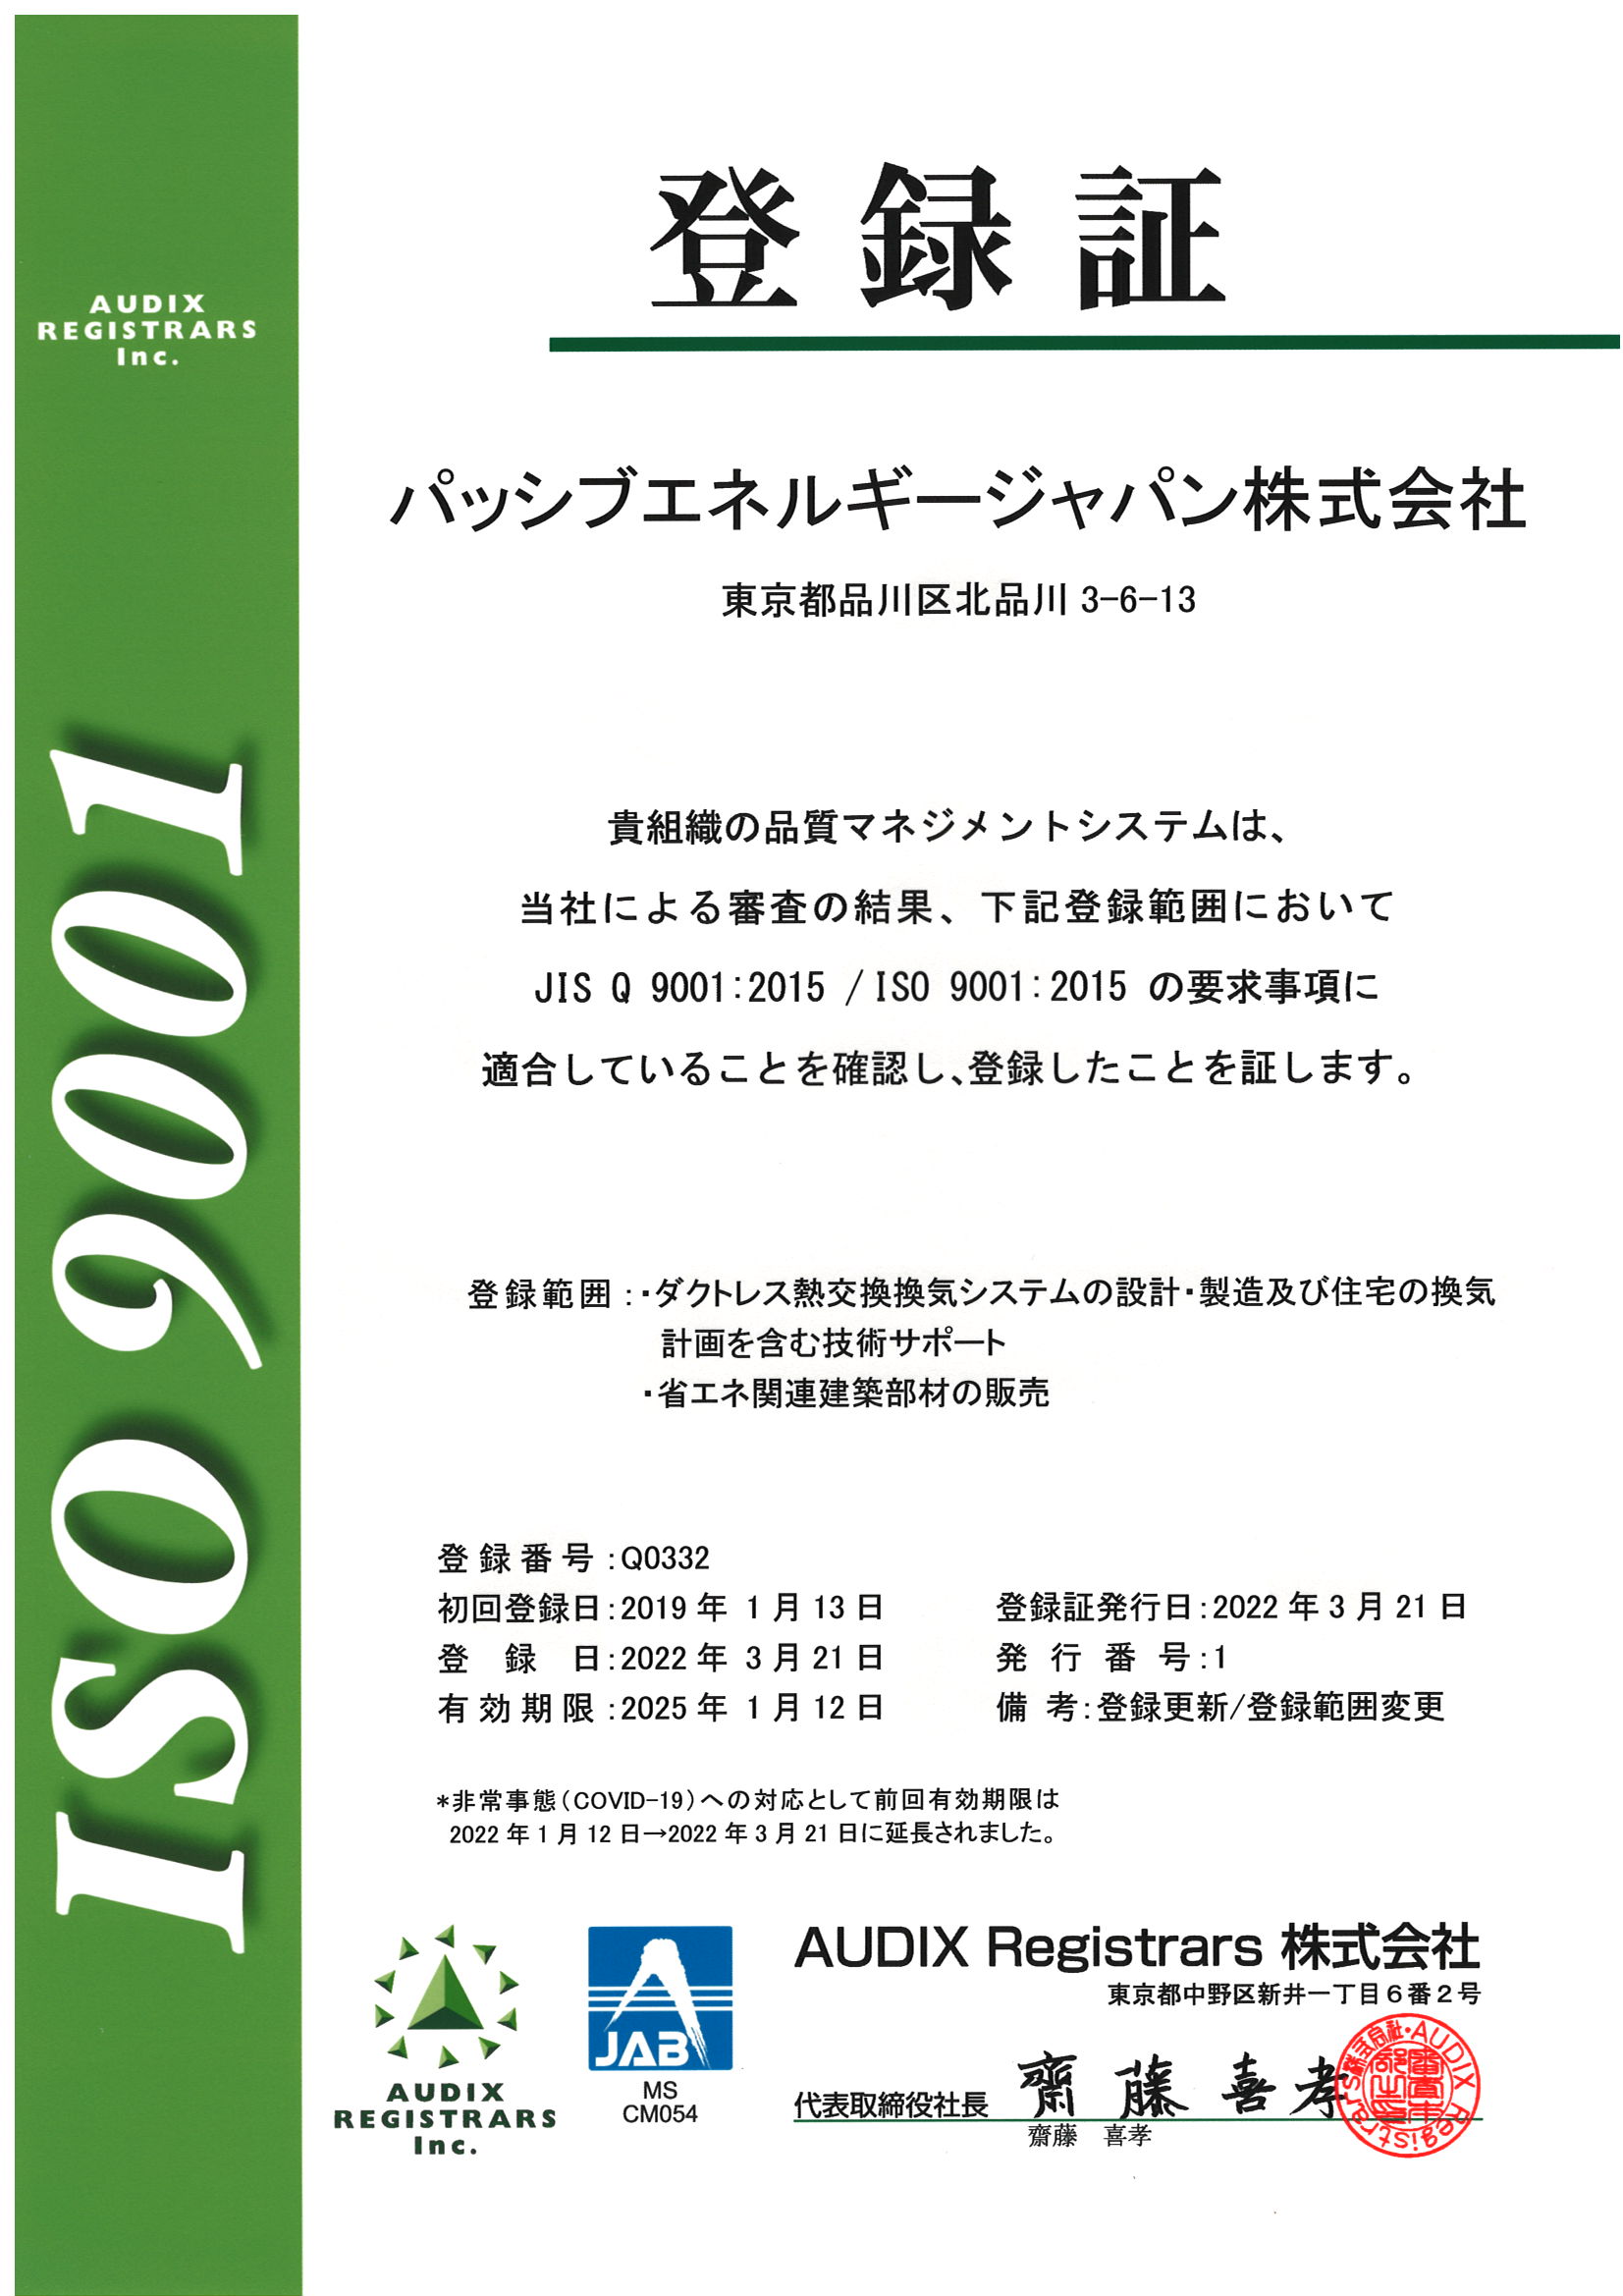 ISO9001 certificate in Japanese.